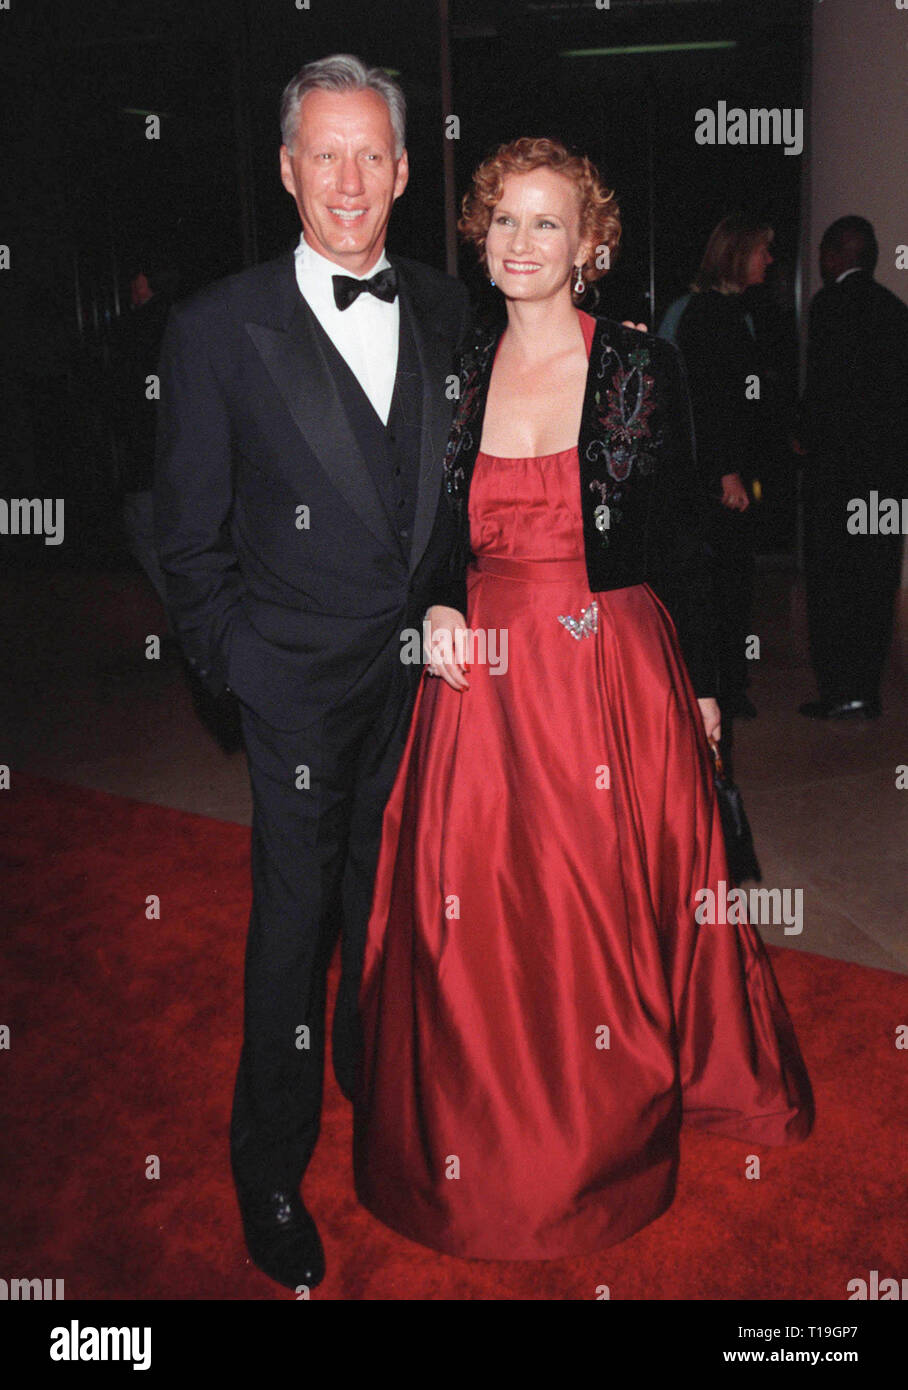 LOS ANGELES, CA - October 23, 1998: Actor JAMES WOODS & girlfriend ANN CRAWFORD at the 20th anniversary Carousel of Hope Ball at the Beverly Hills Hilton. The ball is the world's largest single-event fundraiser, raising money for research to cure childhood diabetes. Stock Photo